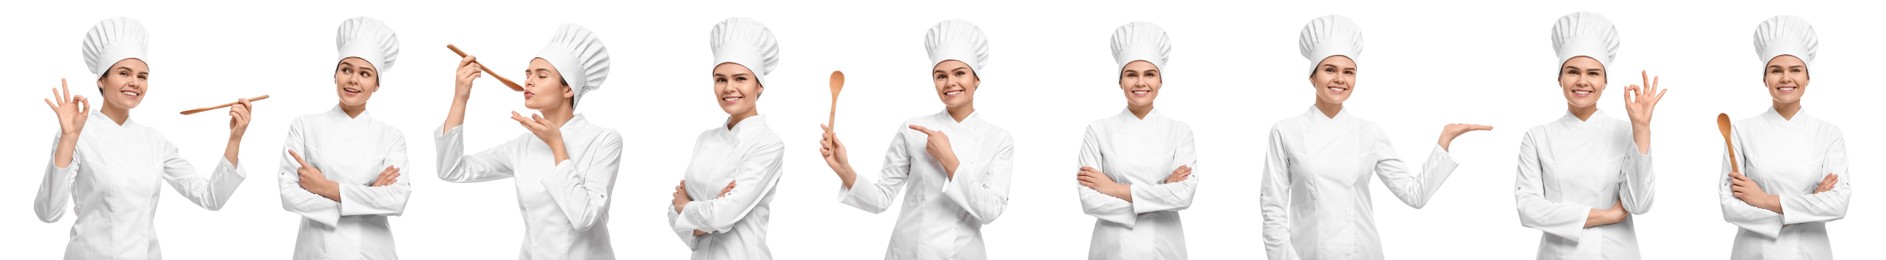 Image of Happy chef in uniform on white background, collage design